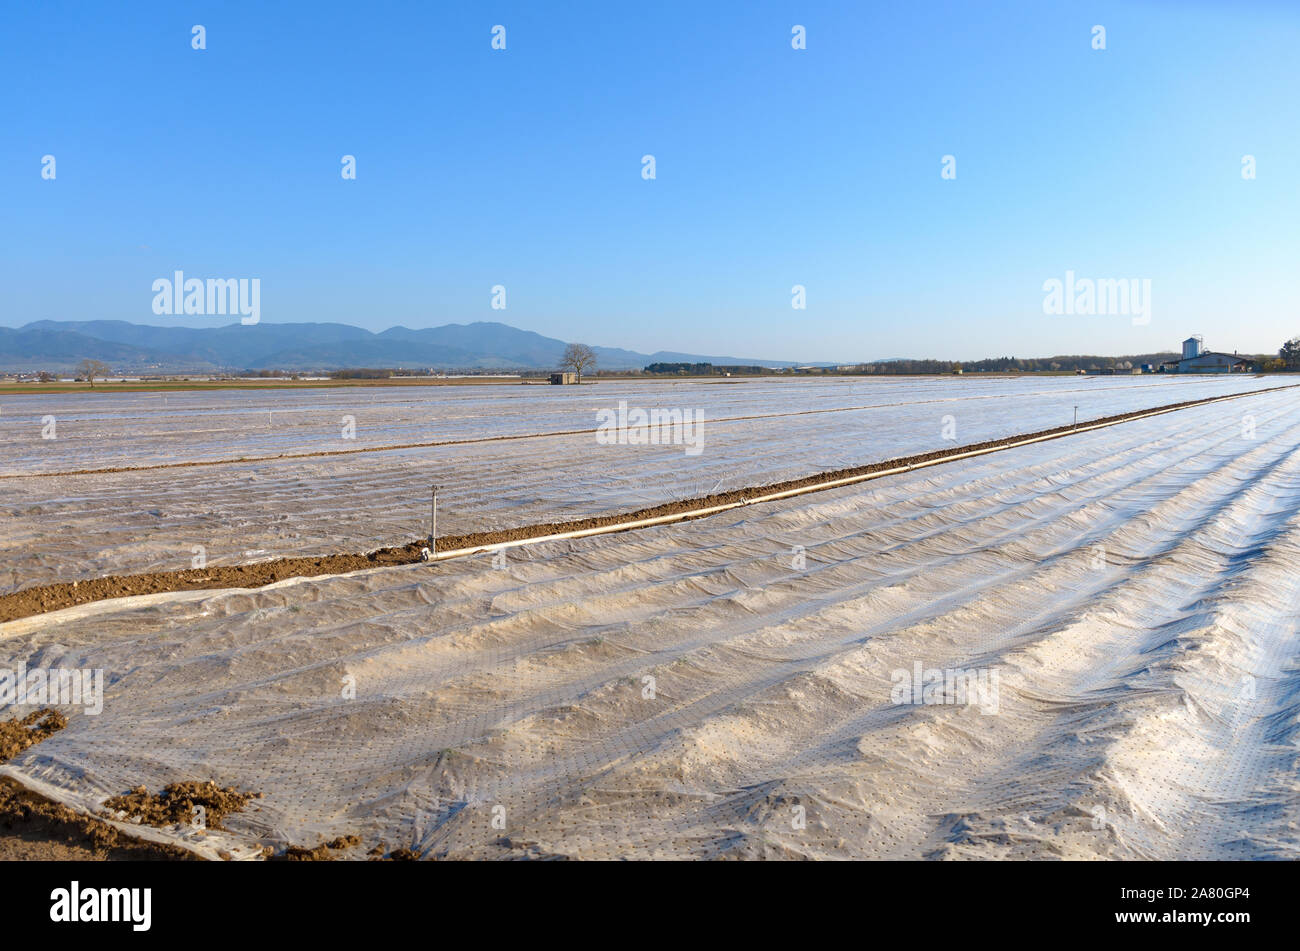 Protective plastic sheeting covering young agricultural crops in a field in a low angle receding view Stock Photo